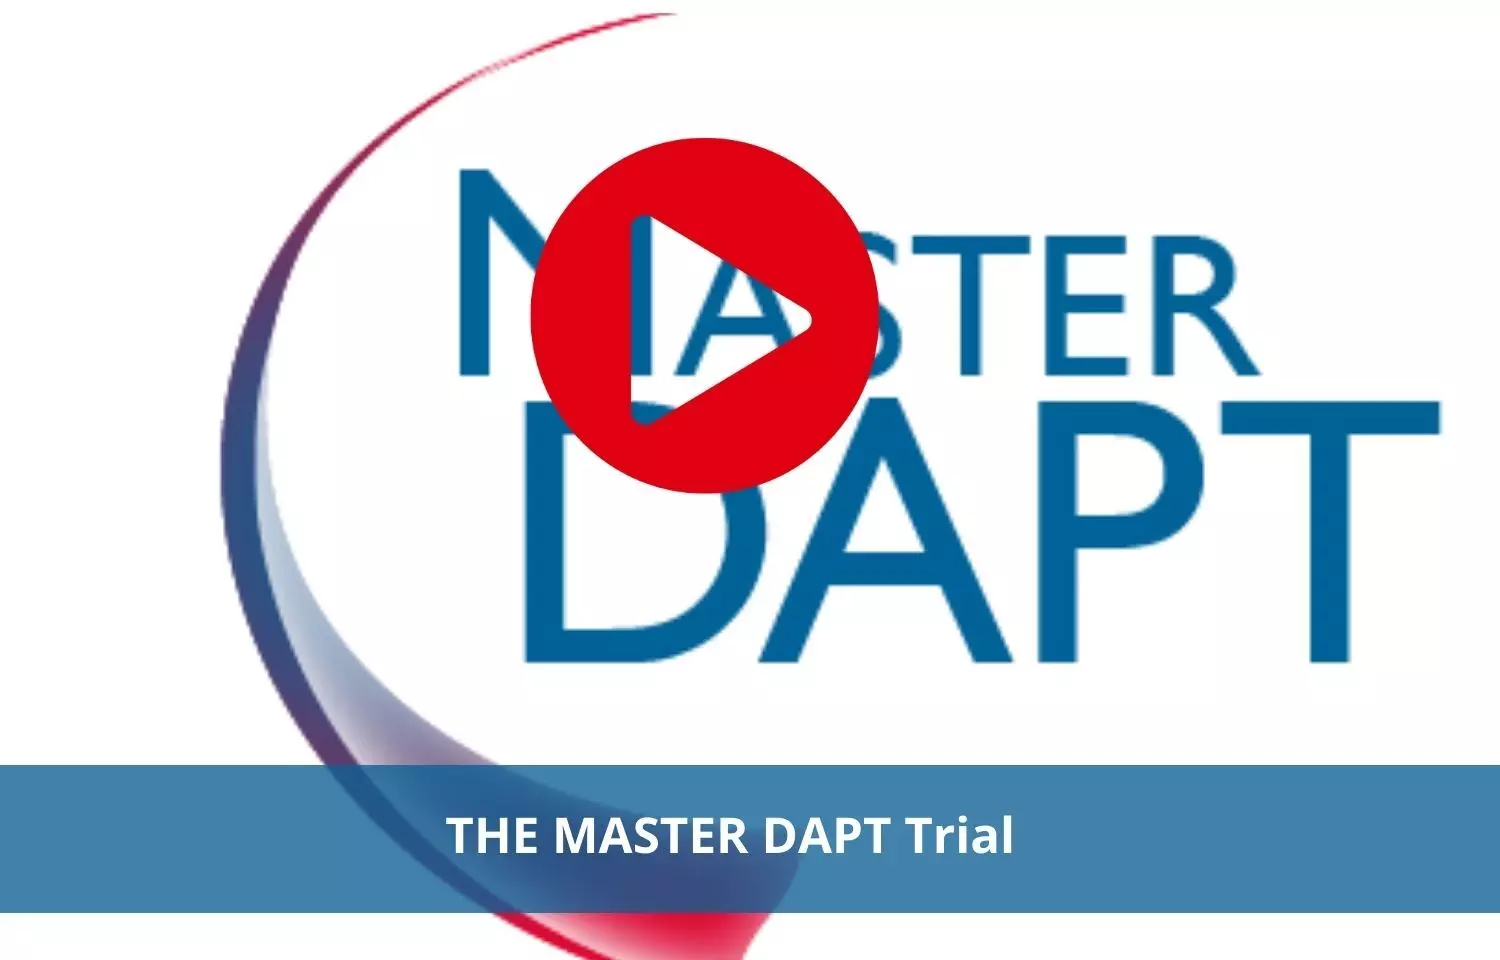 Dual antiplatelet therapy effective: MASTER DAPT Trial